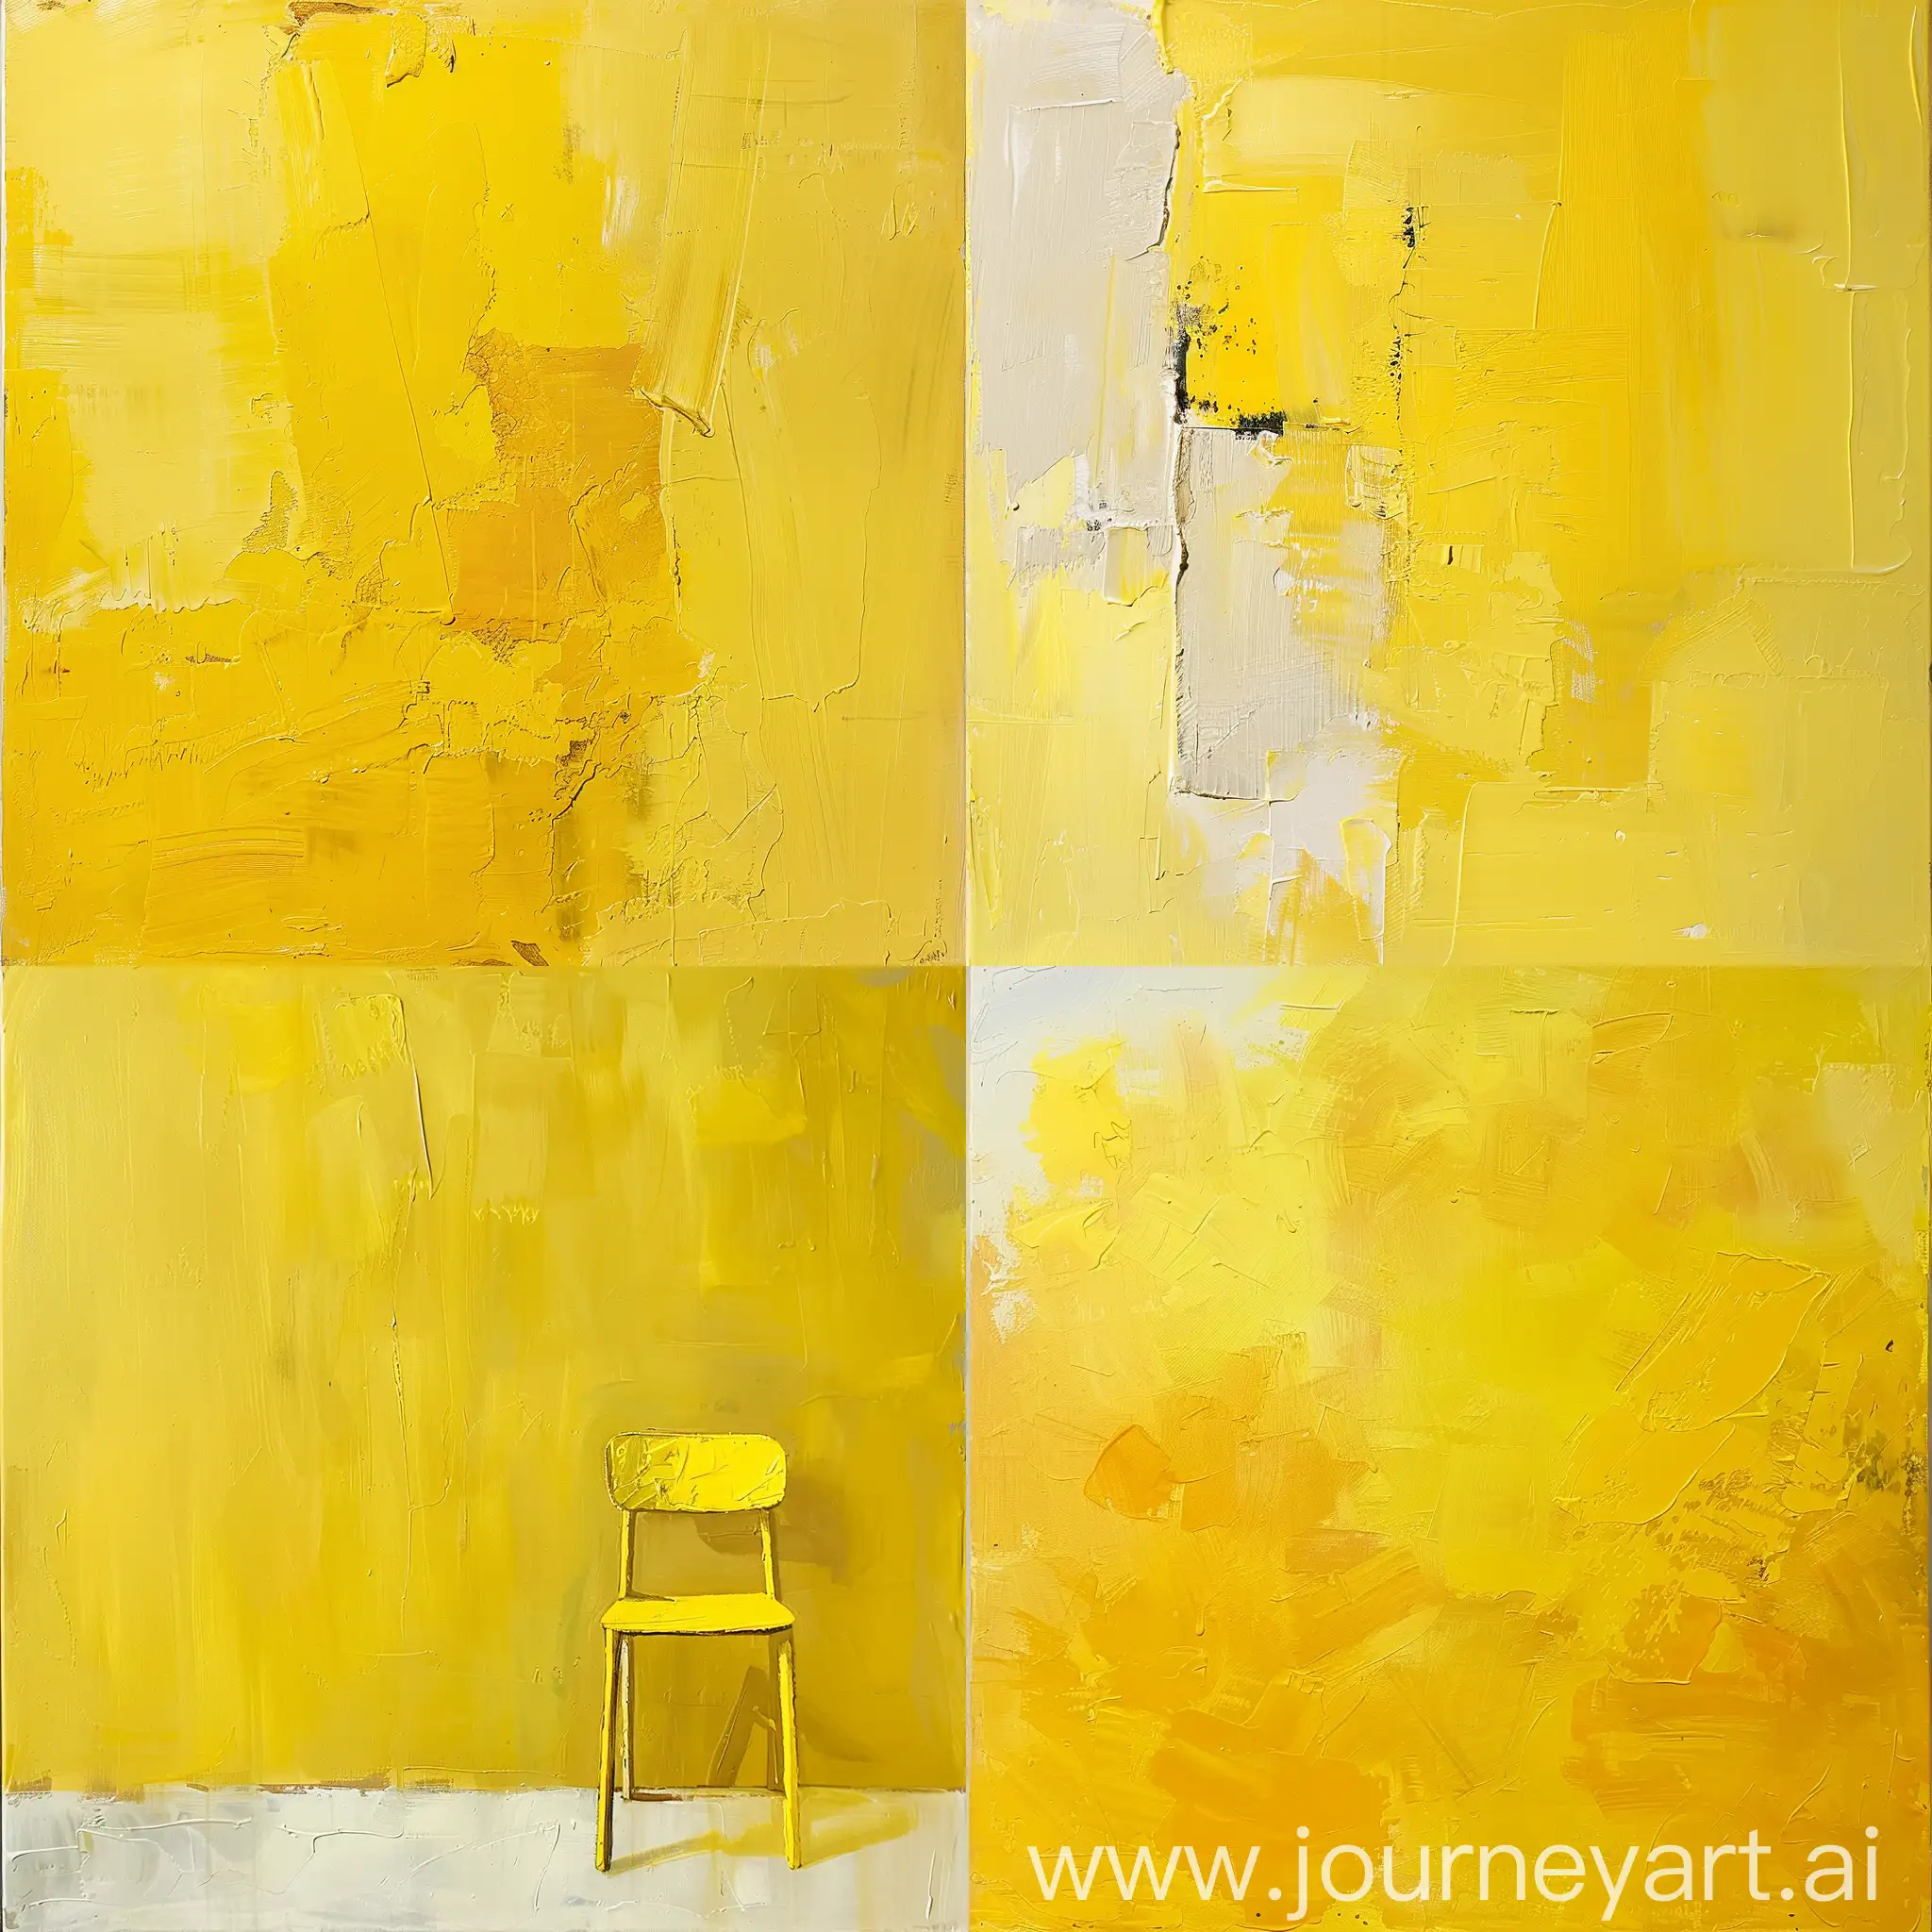 Vibrant-Yellow-Abstract-Art-with-Geometric-Shapes